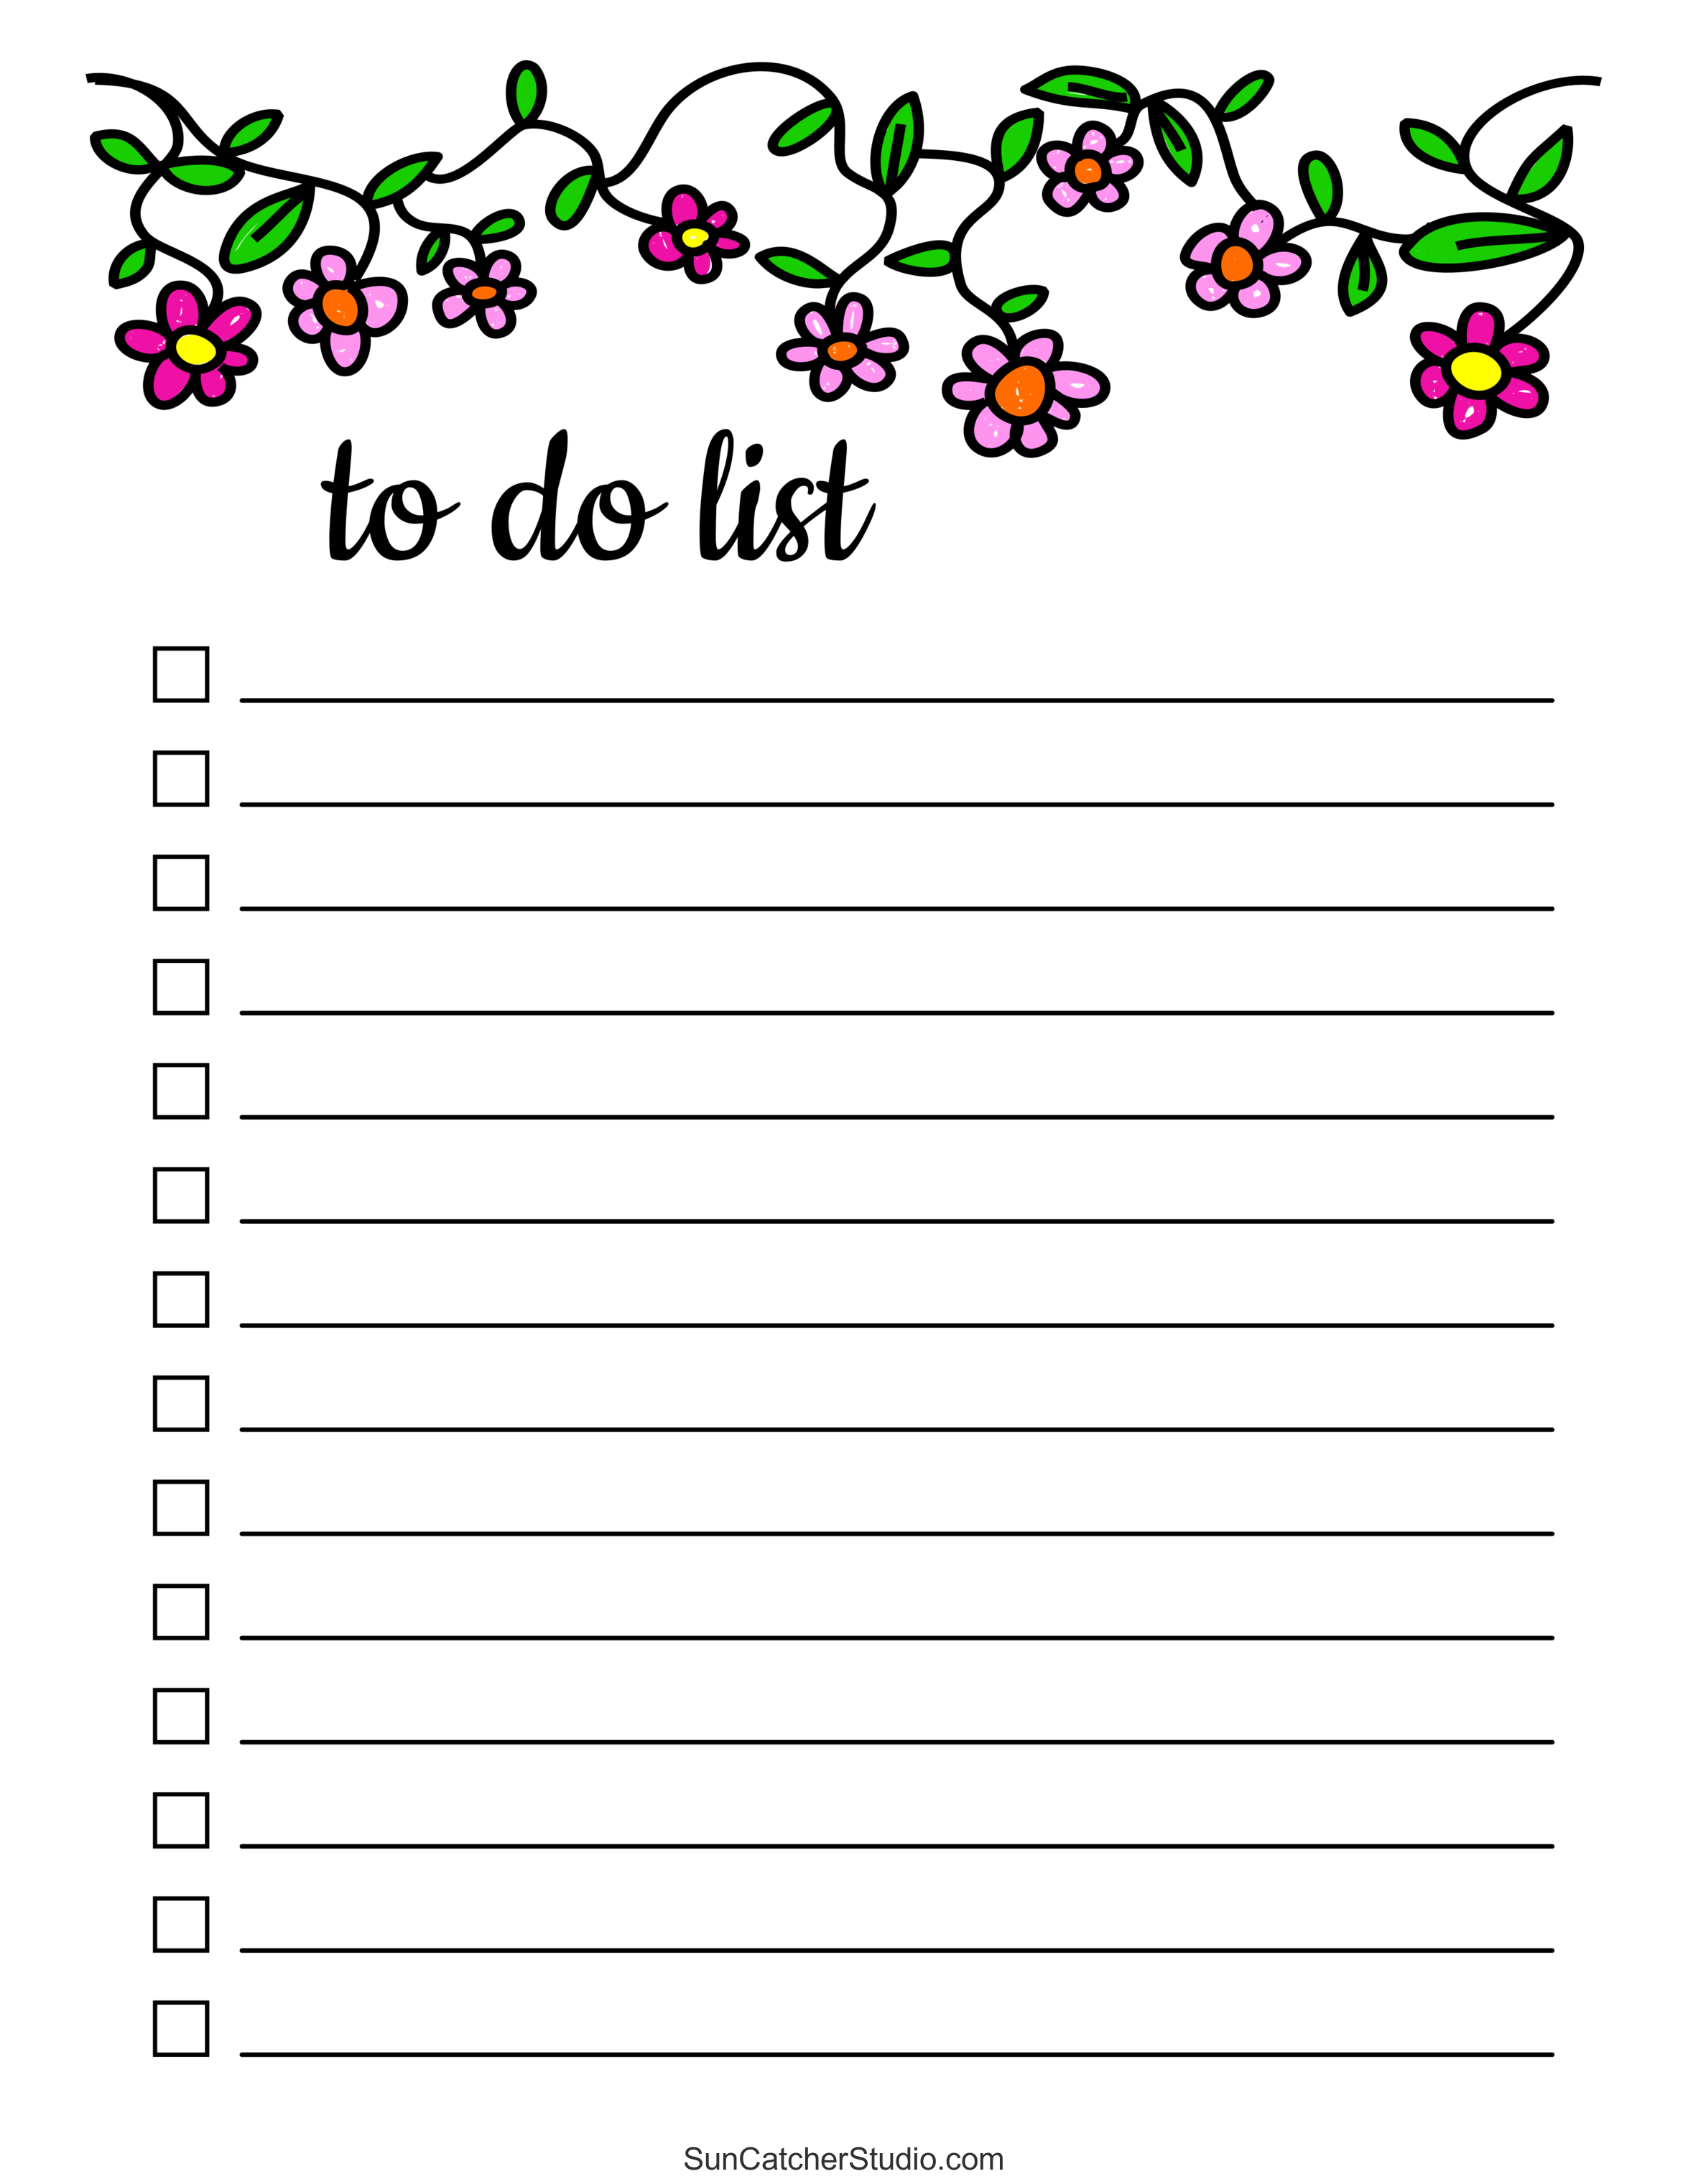 To Do List (Free Printable PDF Templates) – Things To Do – DIY Projects ...